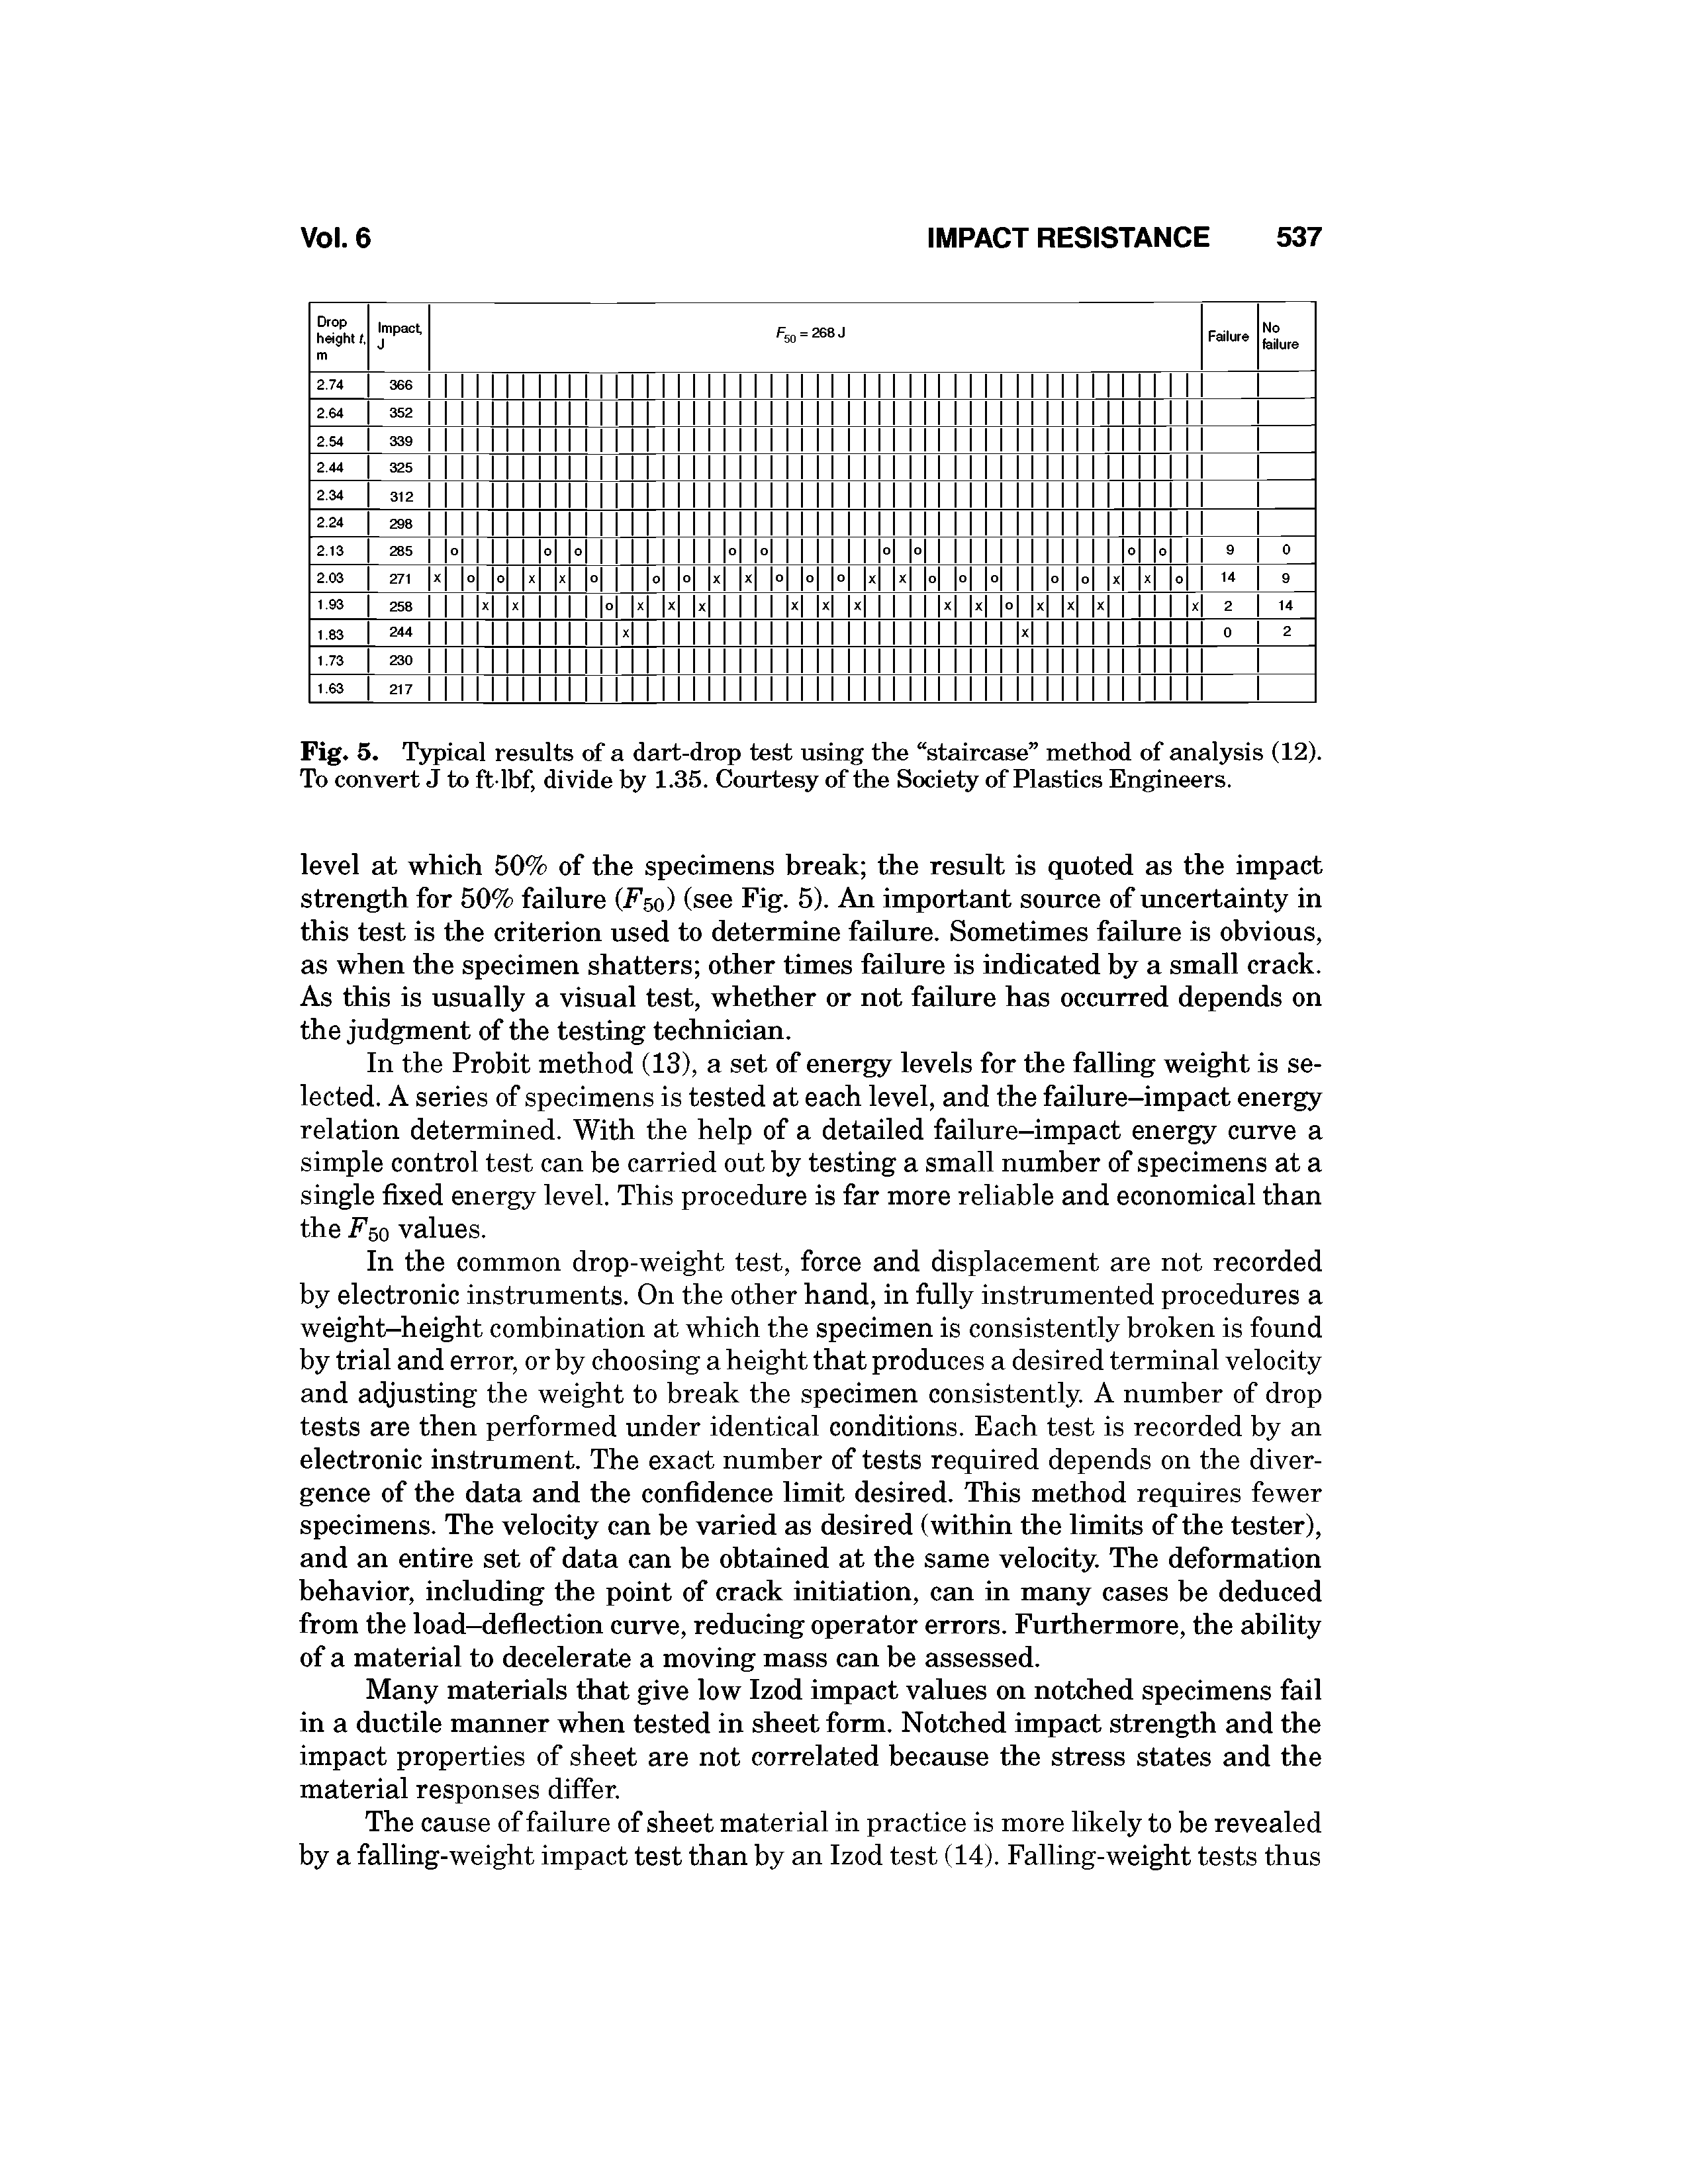 Fig. 5. T5rpical results of a dart-drop test using the staircase method of analysis (12). To convert J to ft-lbf, divide by 1.35. Courtesy of the Society of Plastics Engineers.